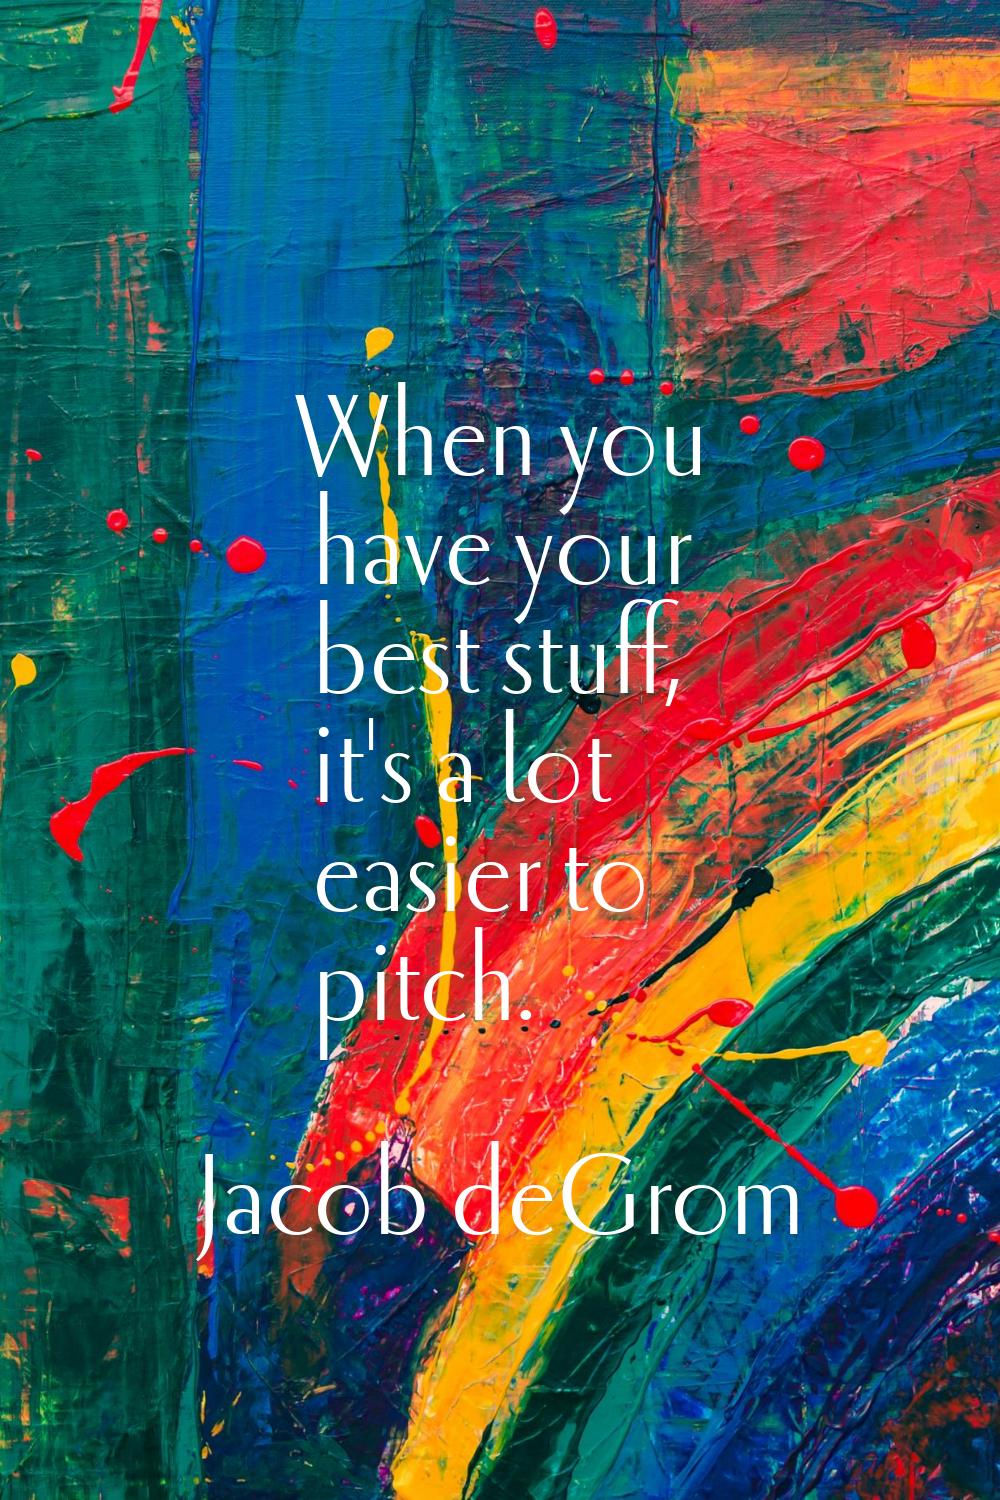 When you have your best stuff, it's a lot easier to pitch.